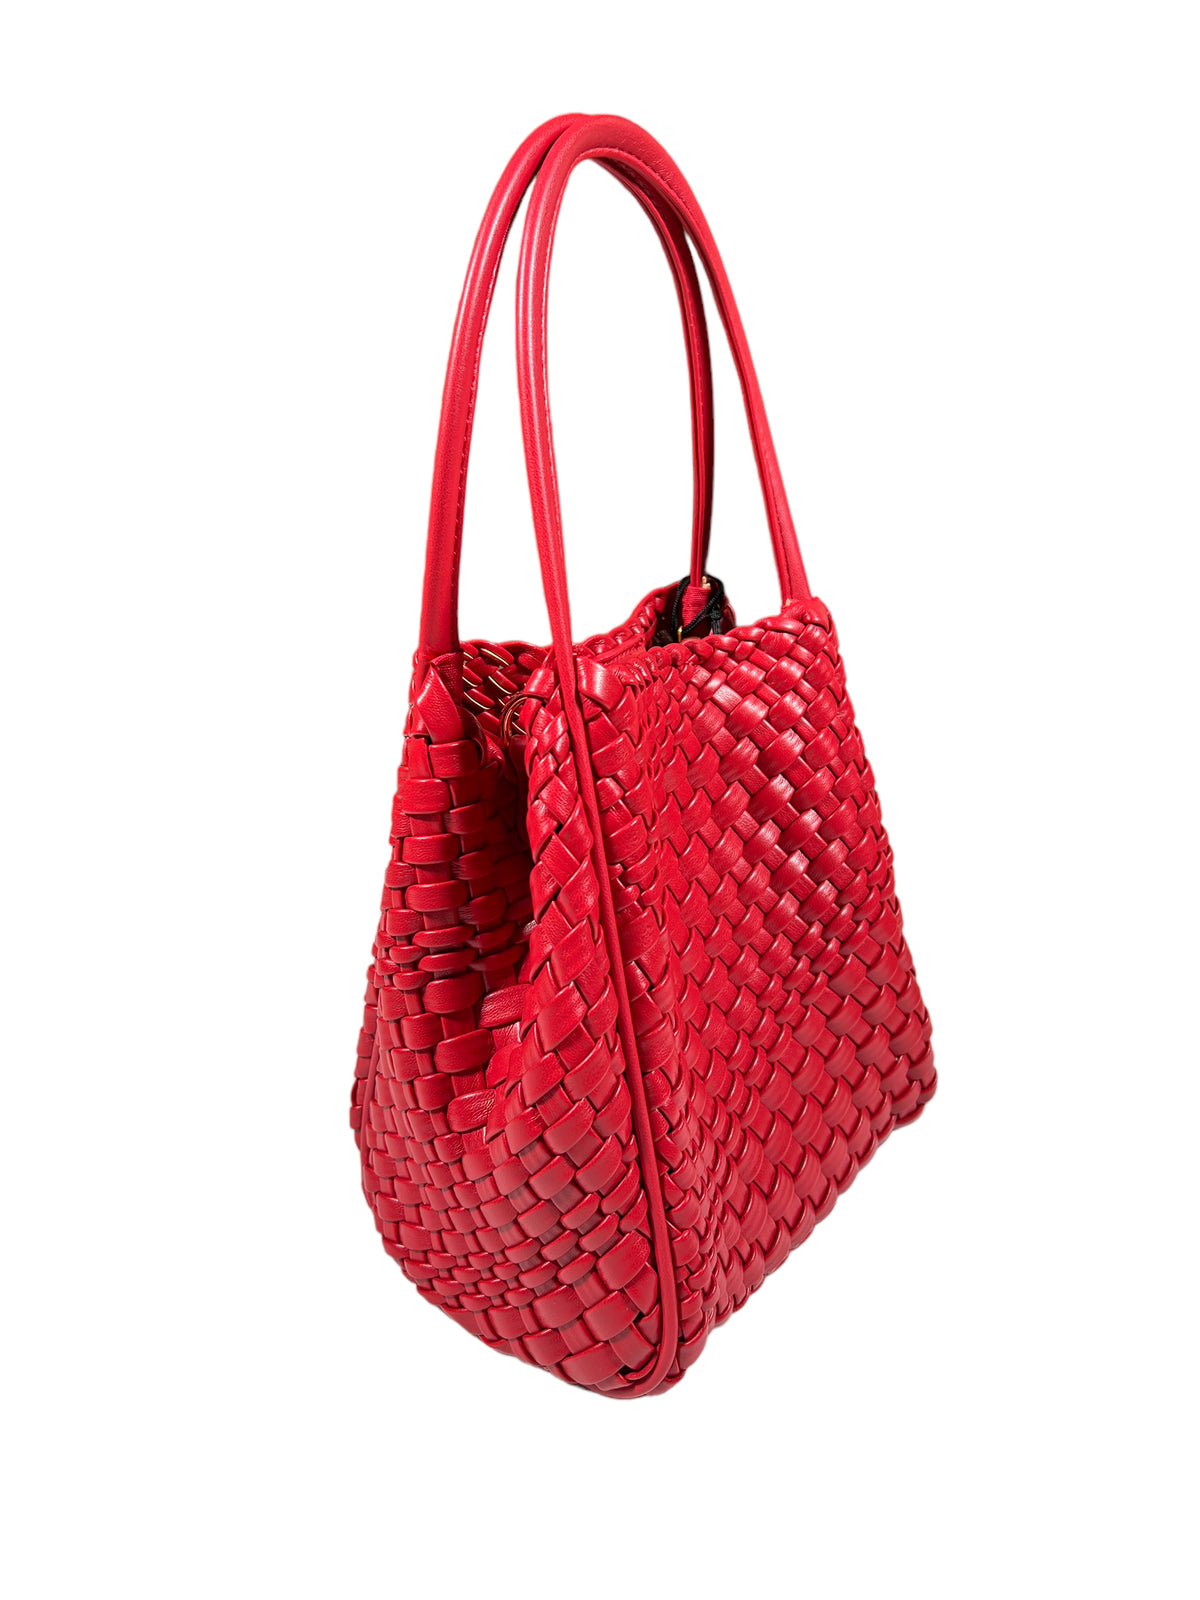 REMI/REID HOLLACE MINI WOVEN TOTE BAG - RED